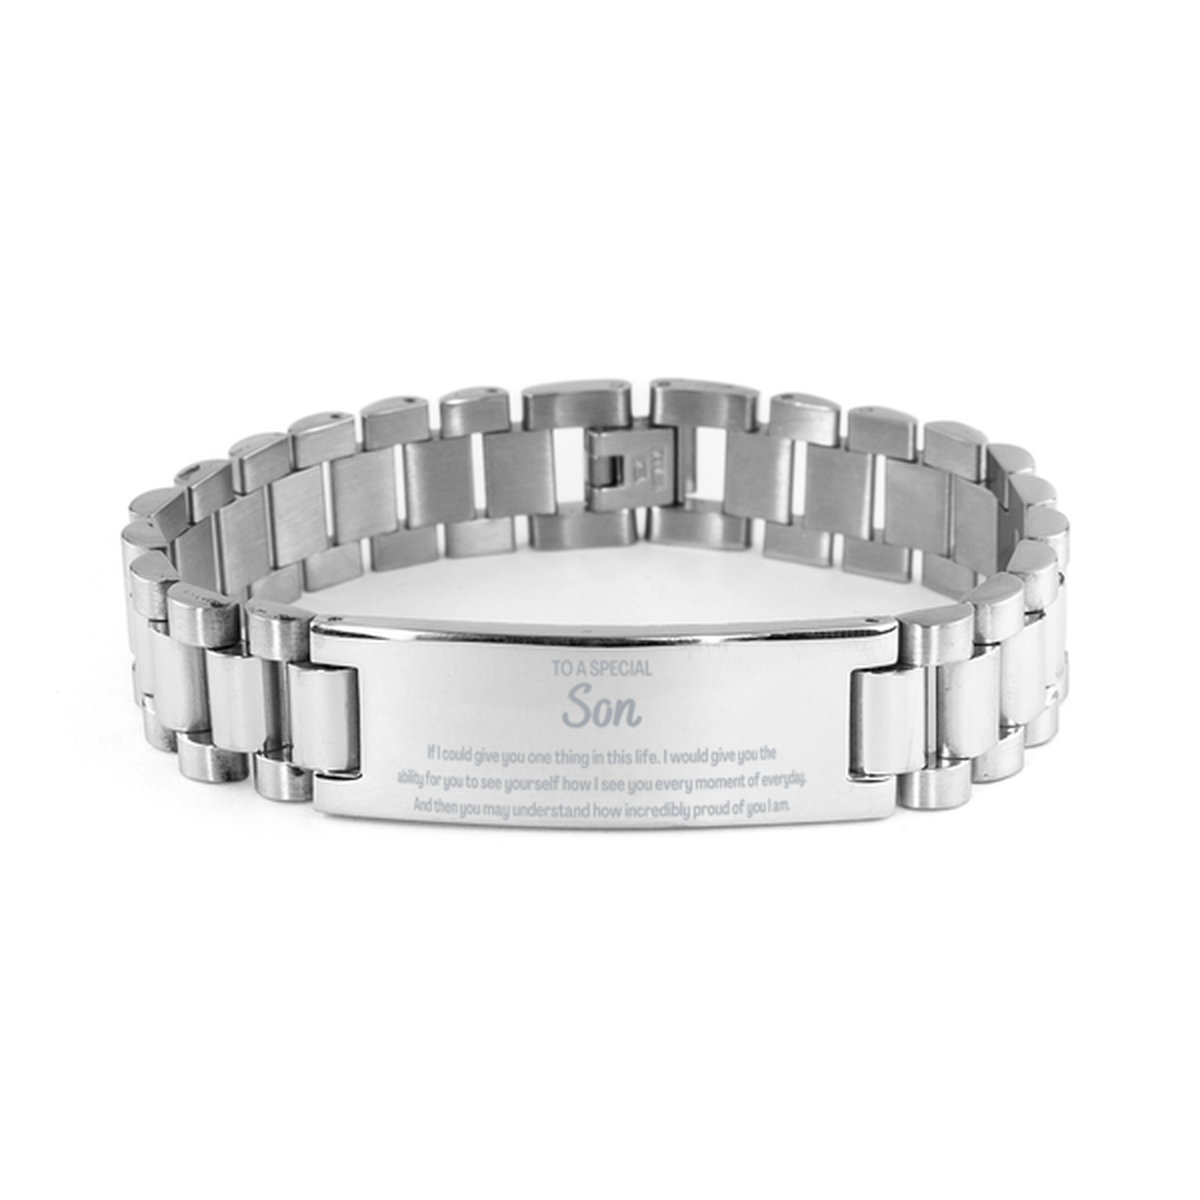 To My Son Ladder Stainless Steel Bracelet, Gifts For Son Engraved, Inspirational Gifts for Christmas Birthday, Epic Gifts for Son To A Special Son how incredibly proud of you I am